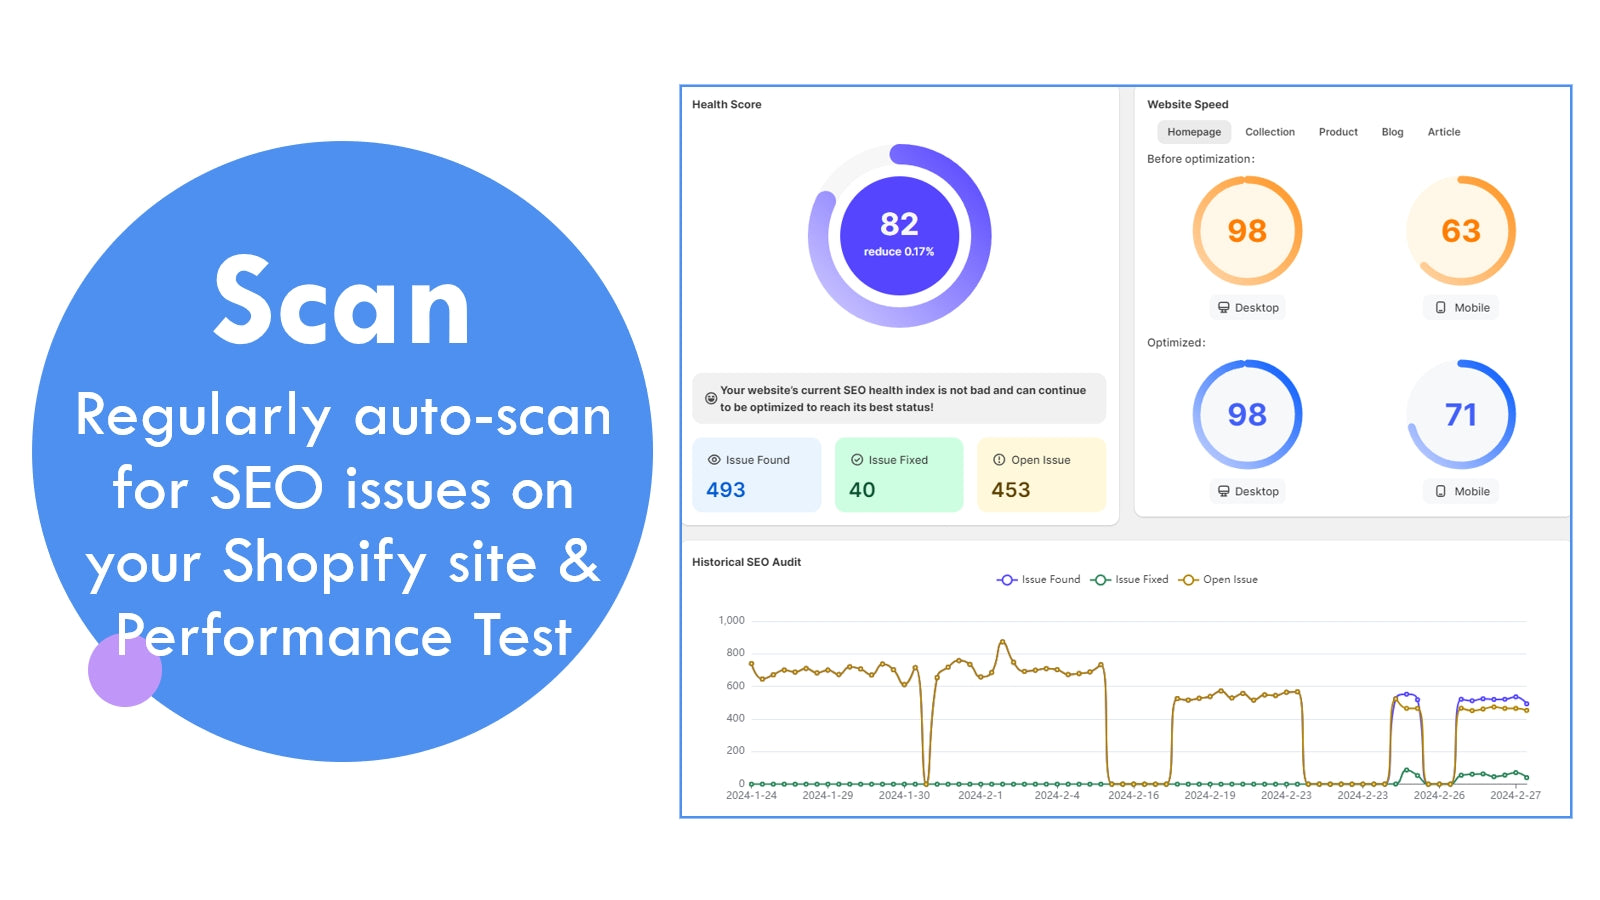 Regularly auto-scan for SEO issues on your Shopify site